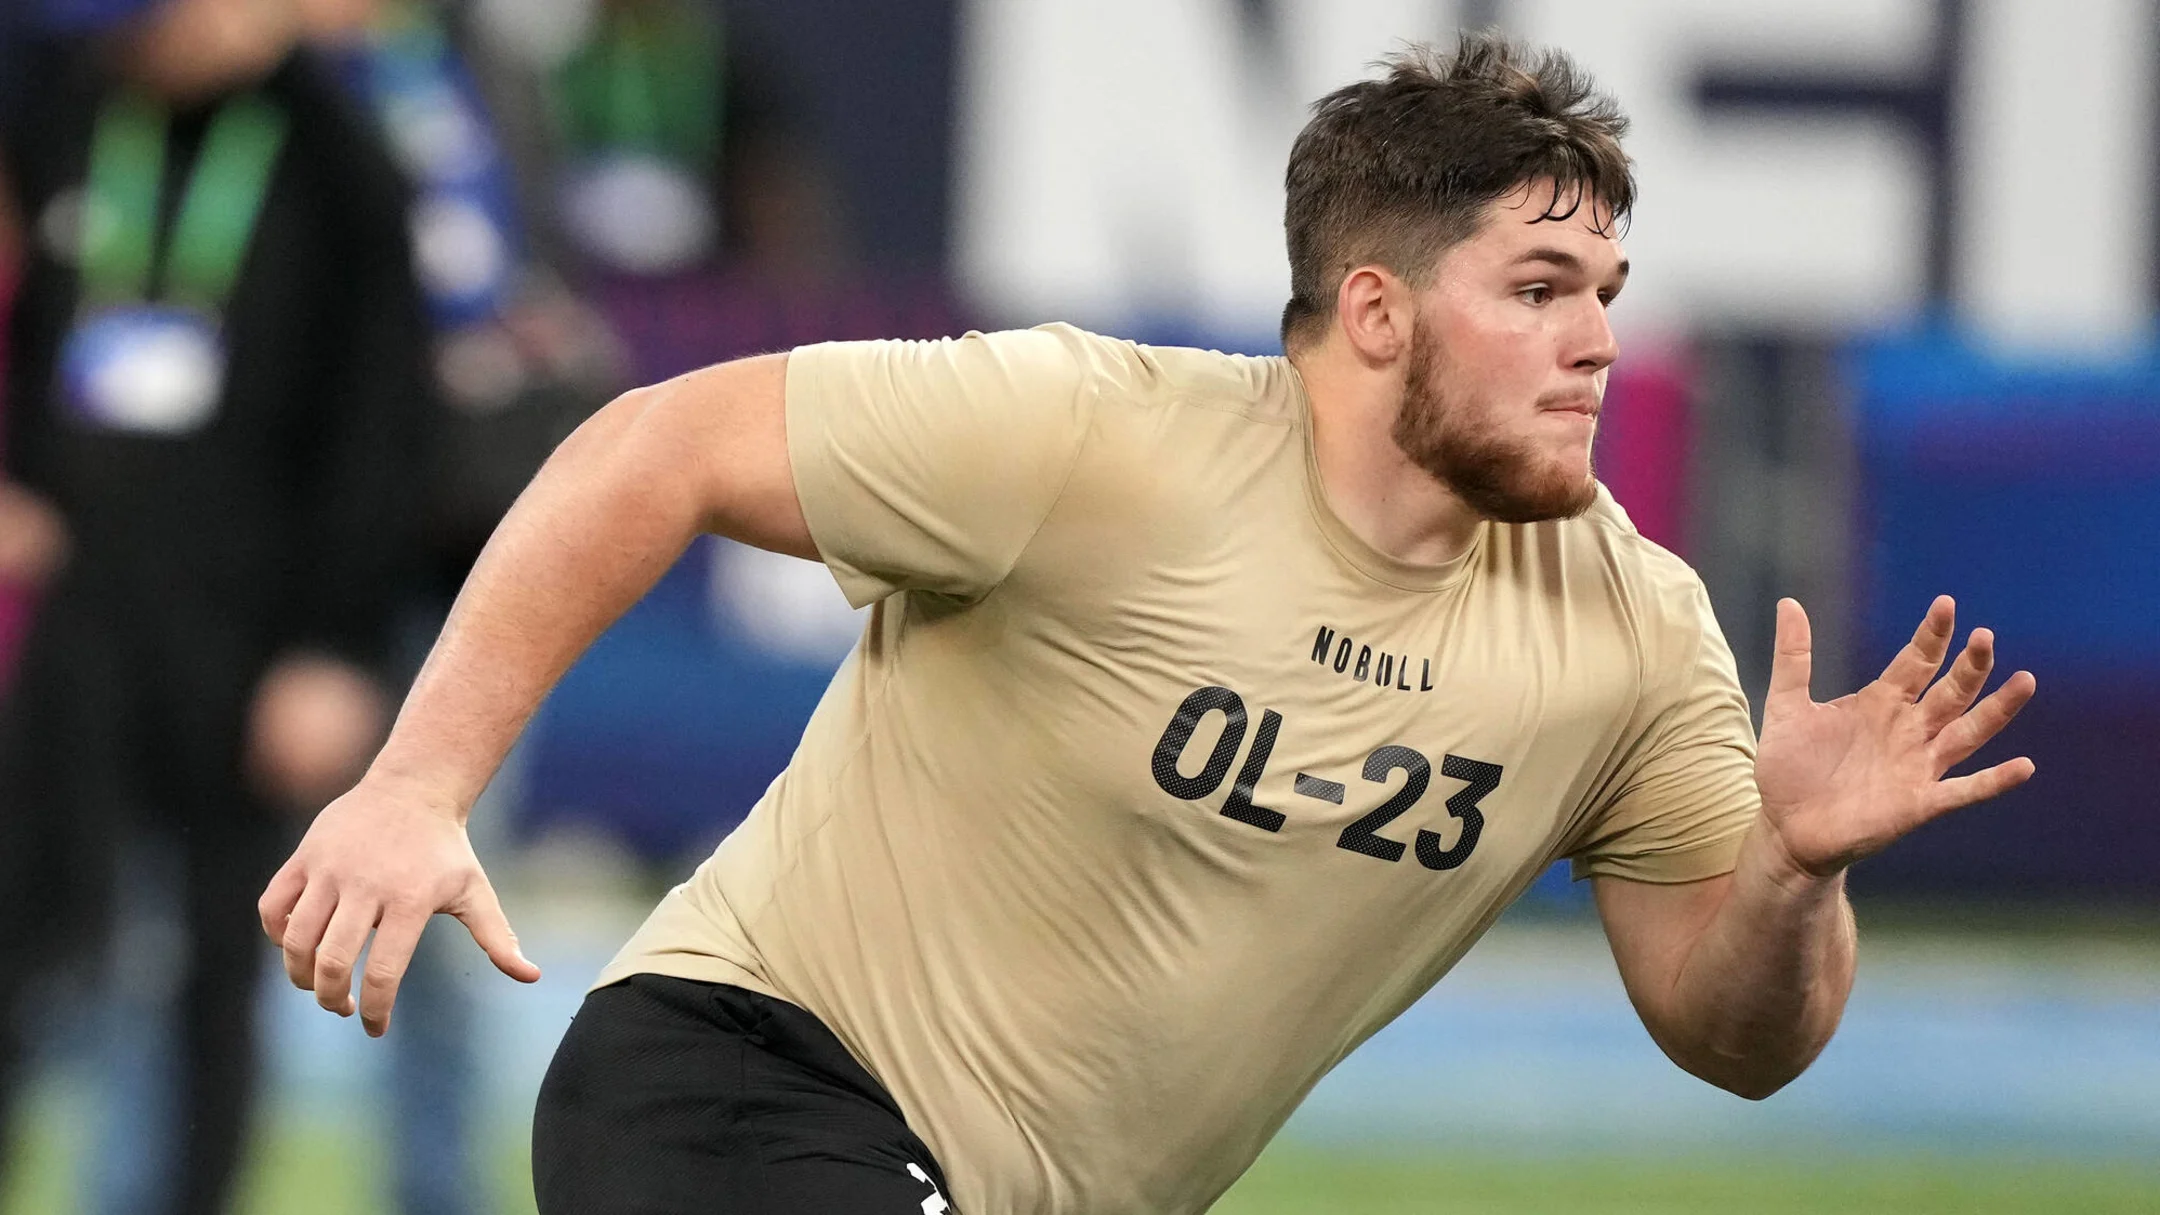 The Pittsburgh Steelers' Quest for Zach Frazier A Crucial Draft Decision